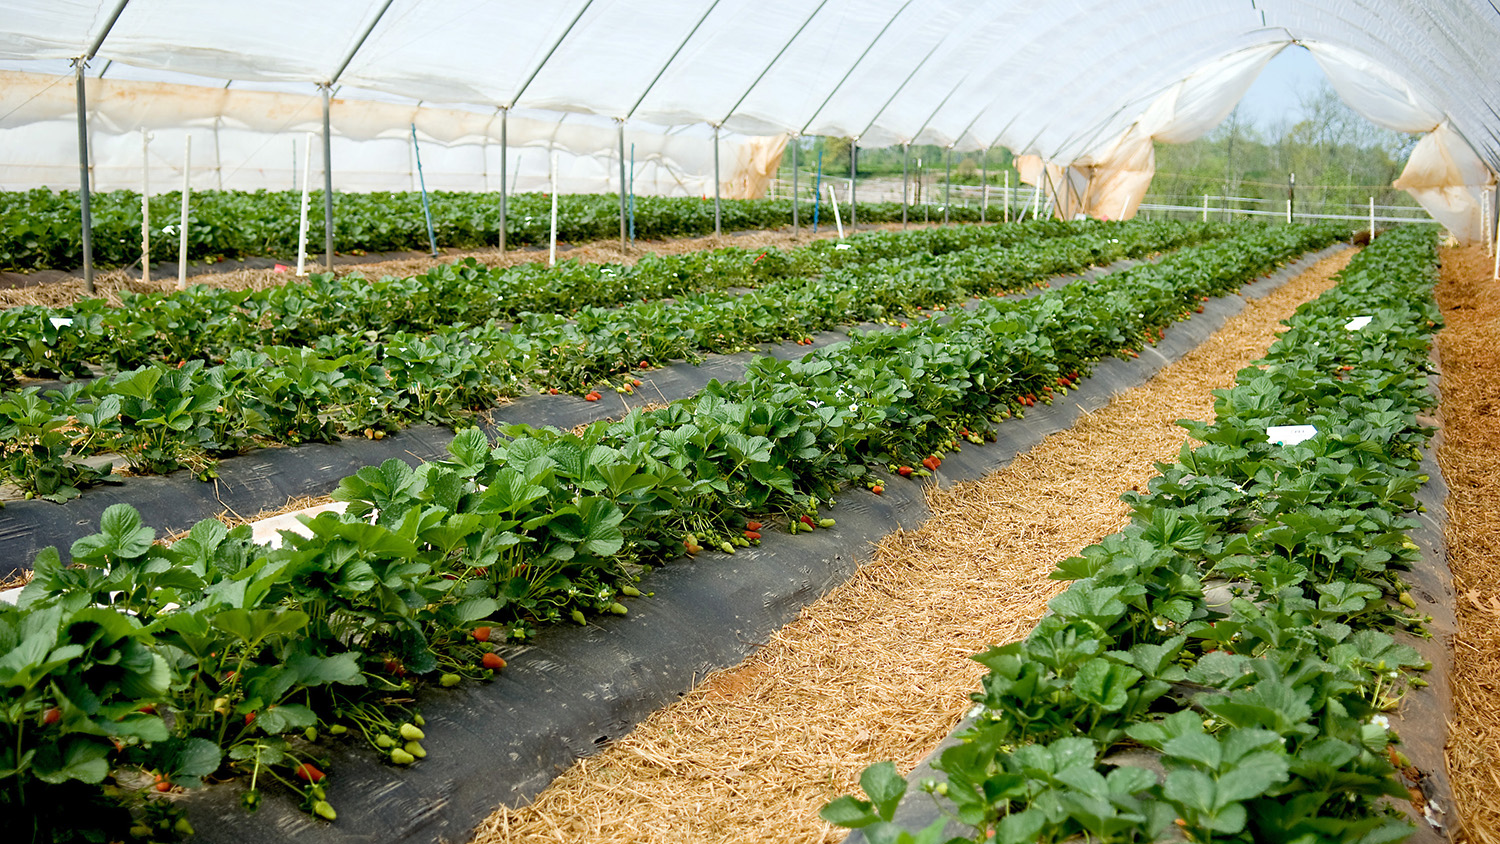 Research stations across the state are assessing strawberry production in high tunnels. Research on the economics of this production method is forthcoming.